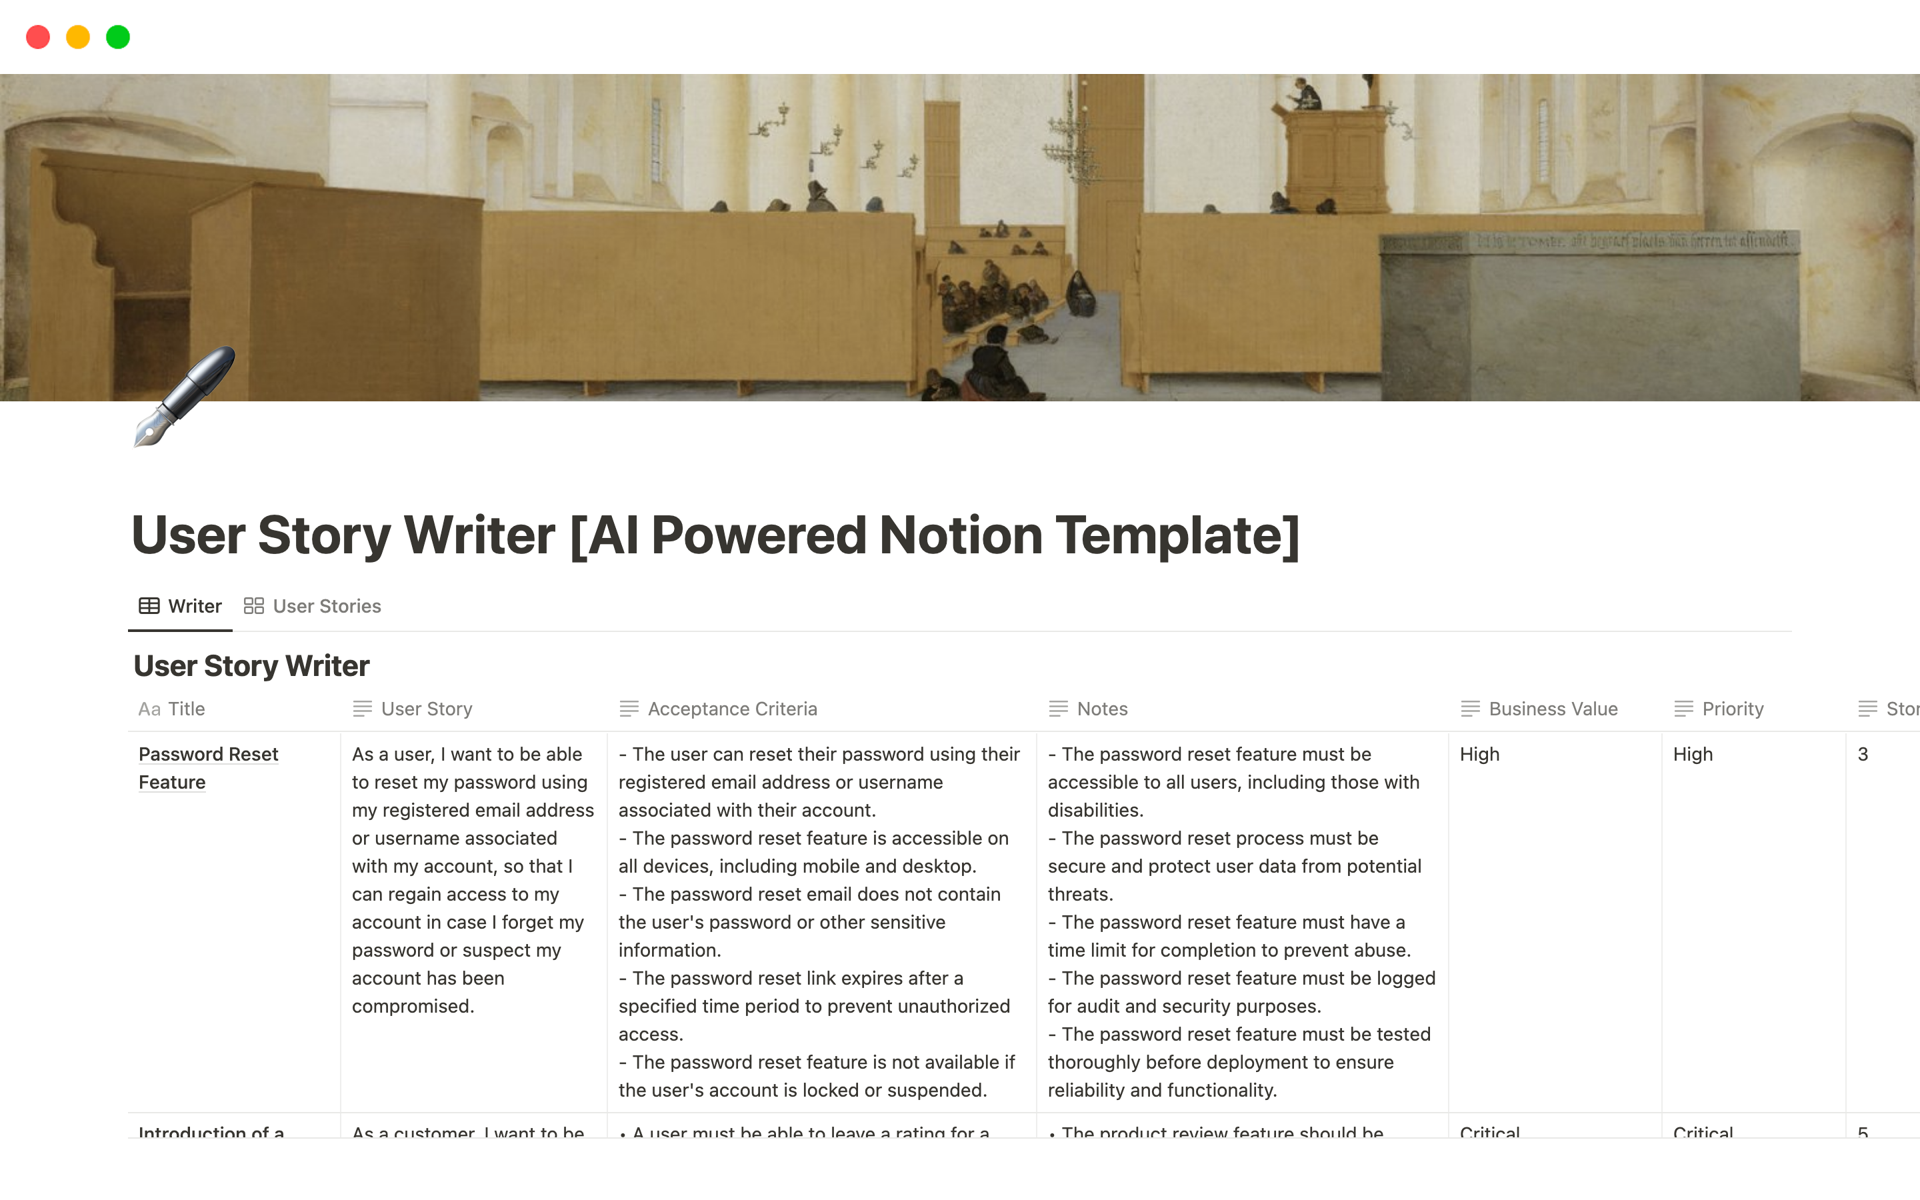 User Story Writer, powered by Notion AI, is an intuitive template designed for product managers. It streamlines the process of describing, prioritizing, and estimating development tasks, always keeping the end user's perspective at the forefront.